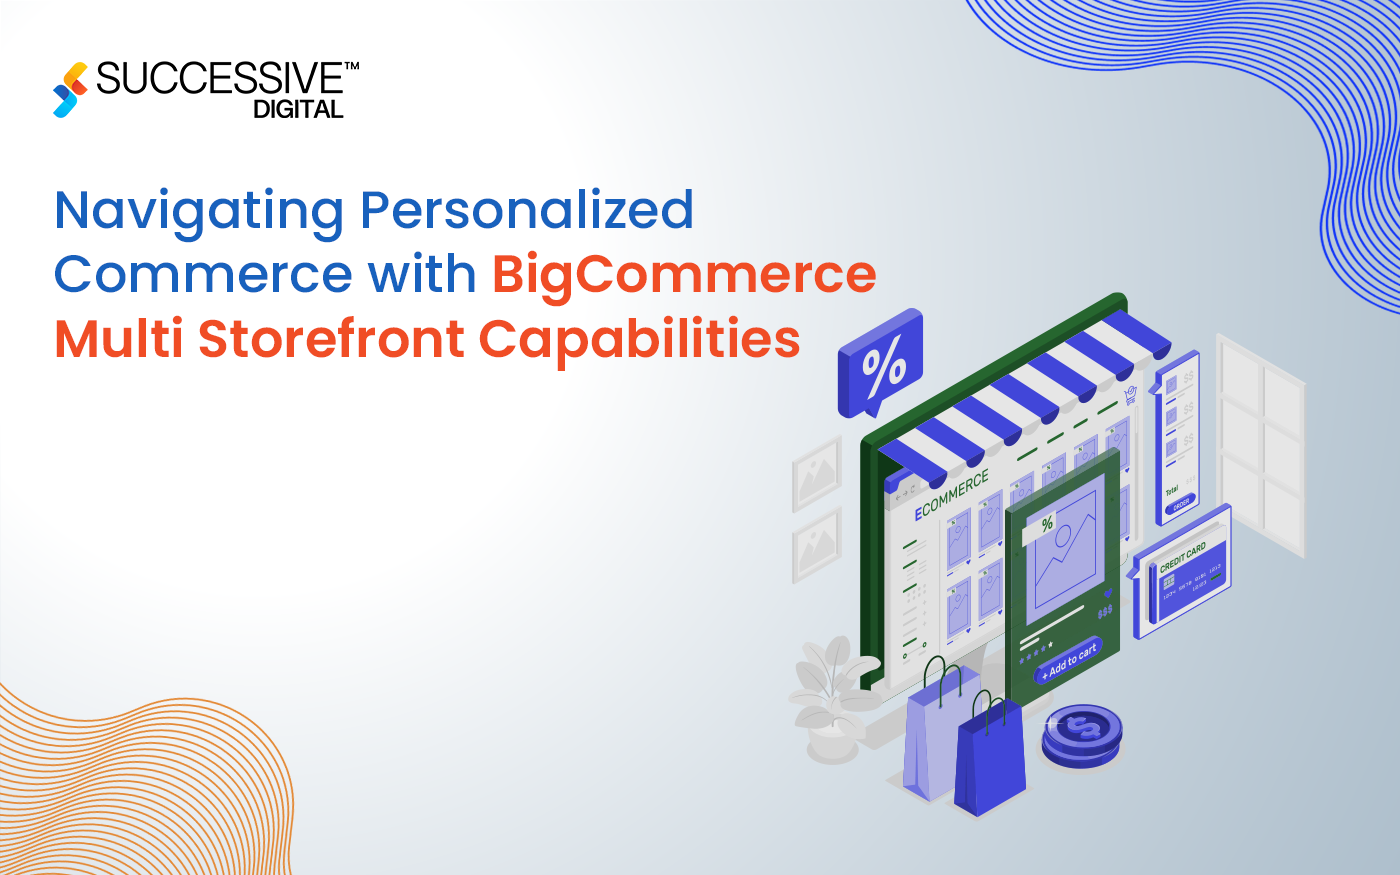 Navigating Personalized Commerce with BigCommerce Multi Storefront Capabilities